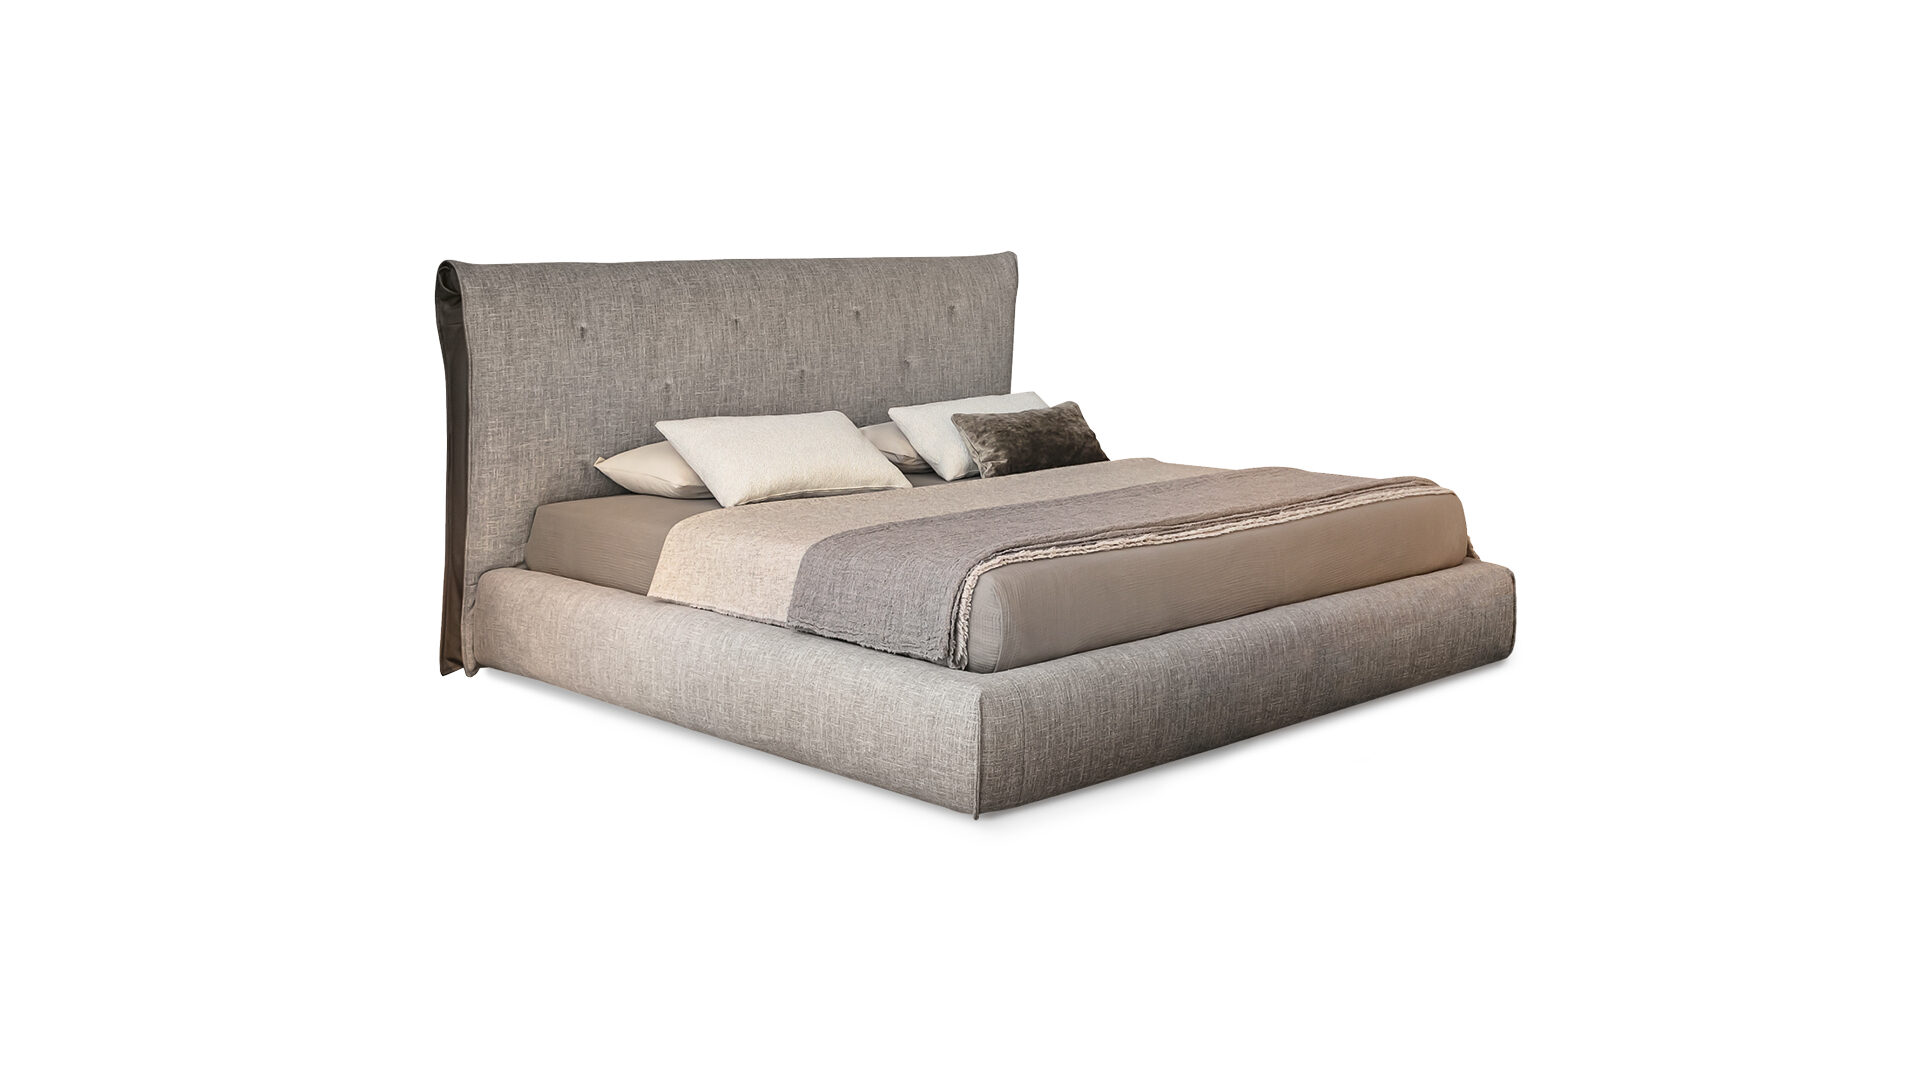 saddle-bed-open-png